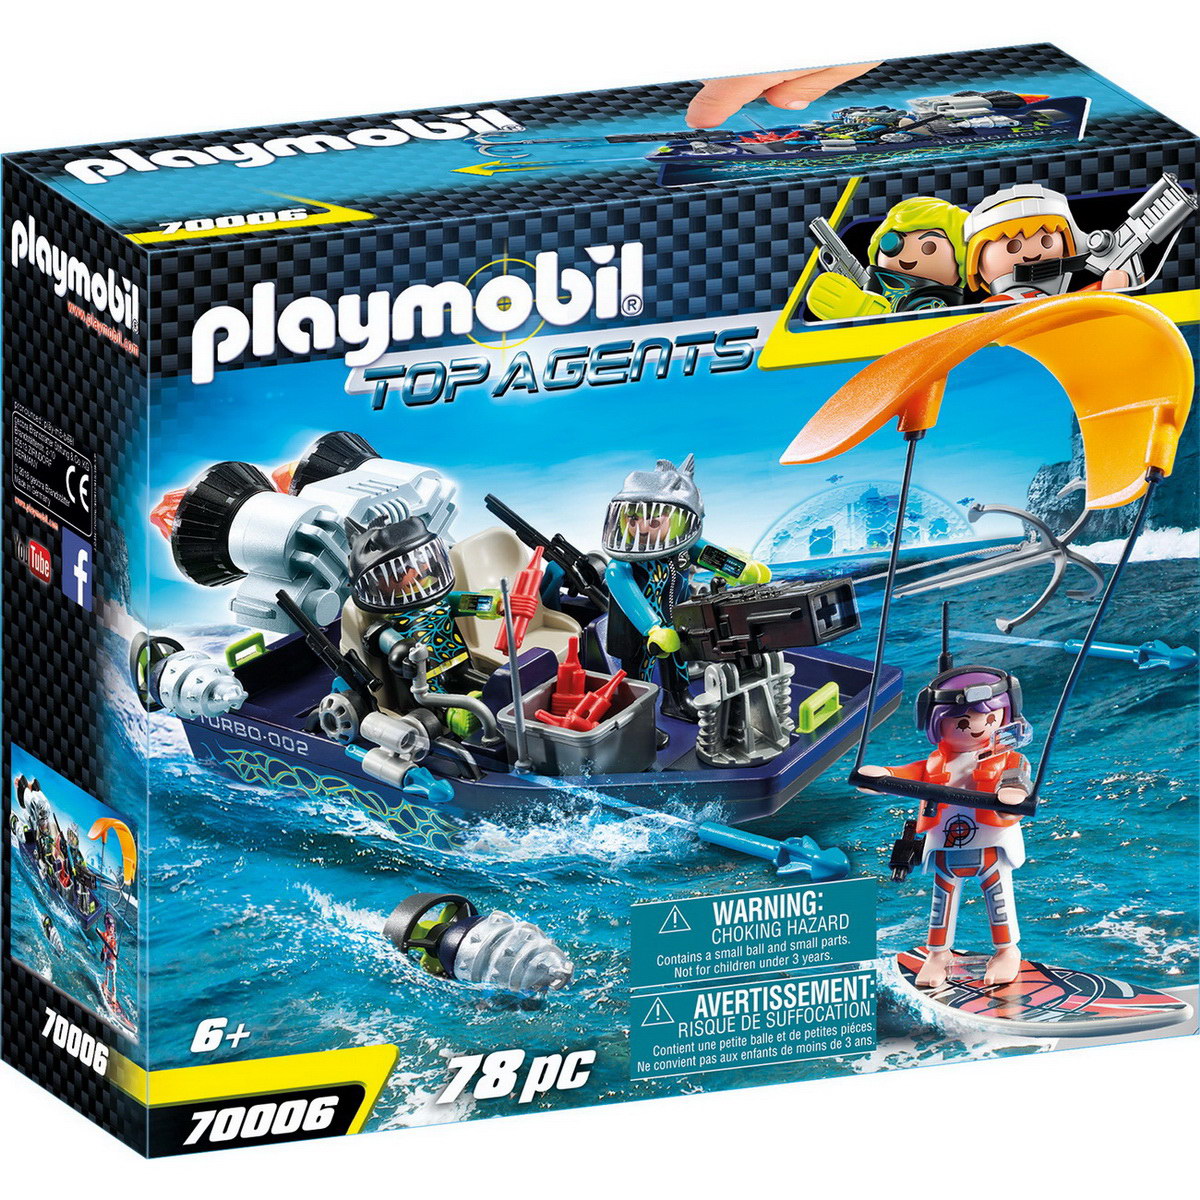 Playmobil 70006 - Team S.H.A.R.K. Harpoon Craft  (Top Agents)